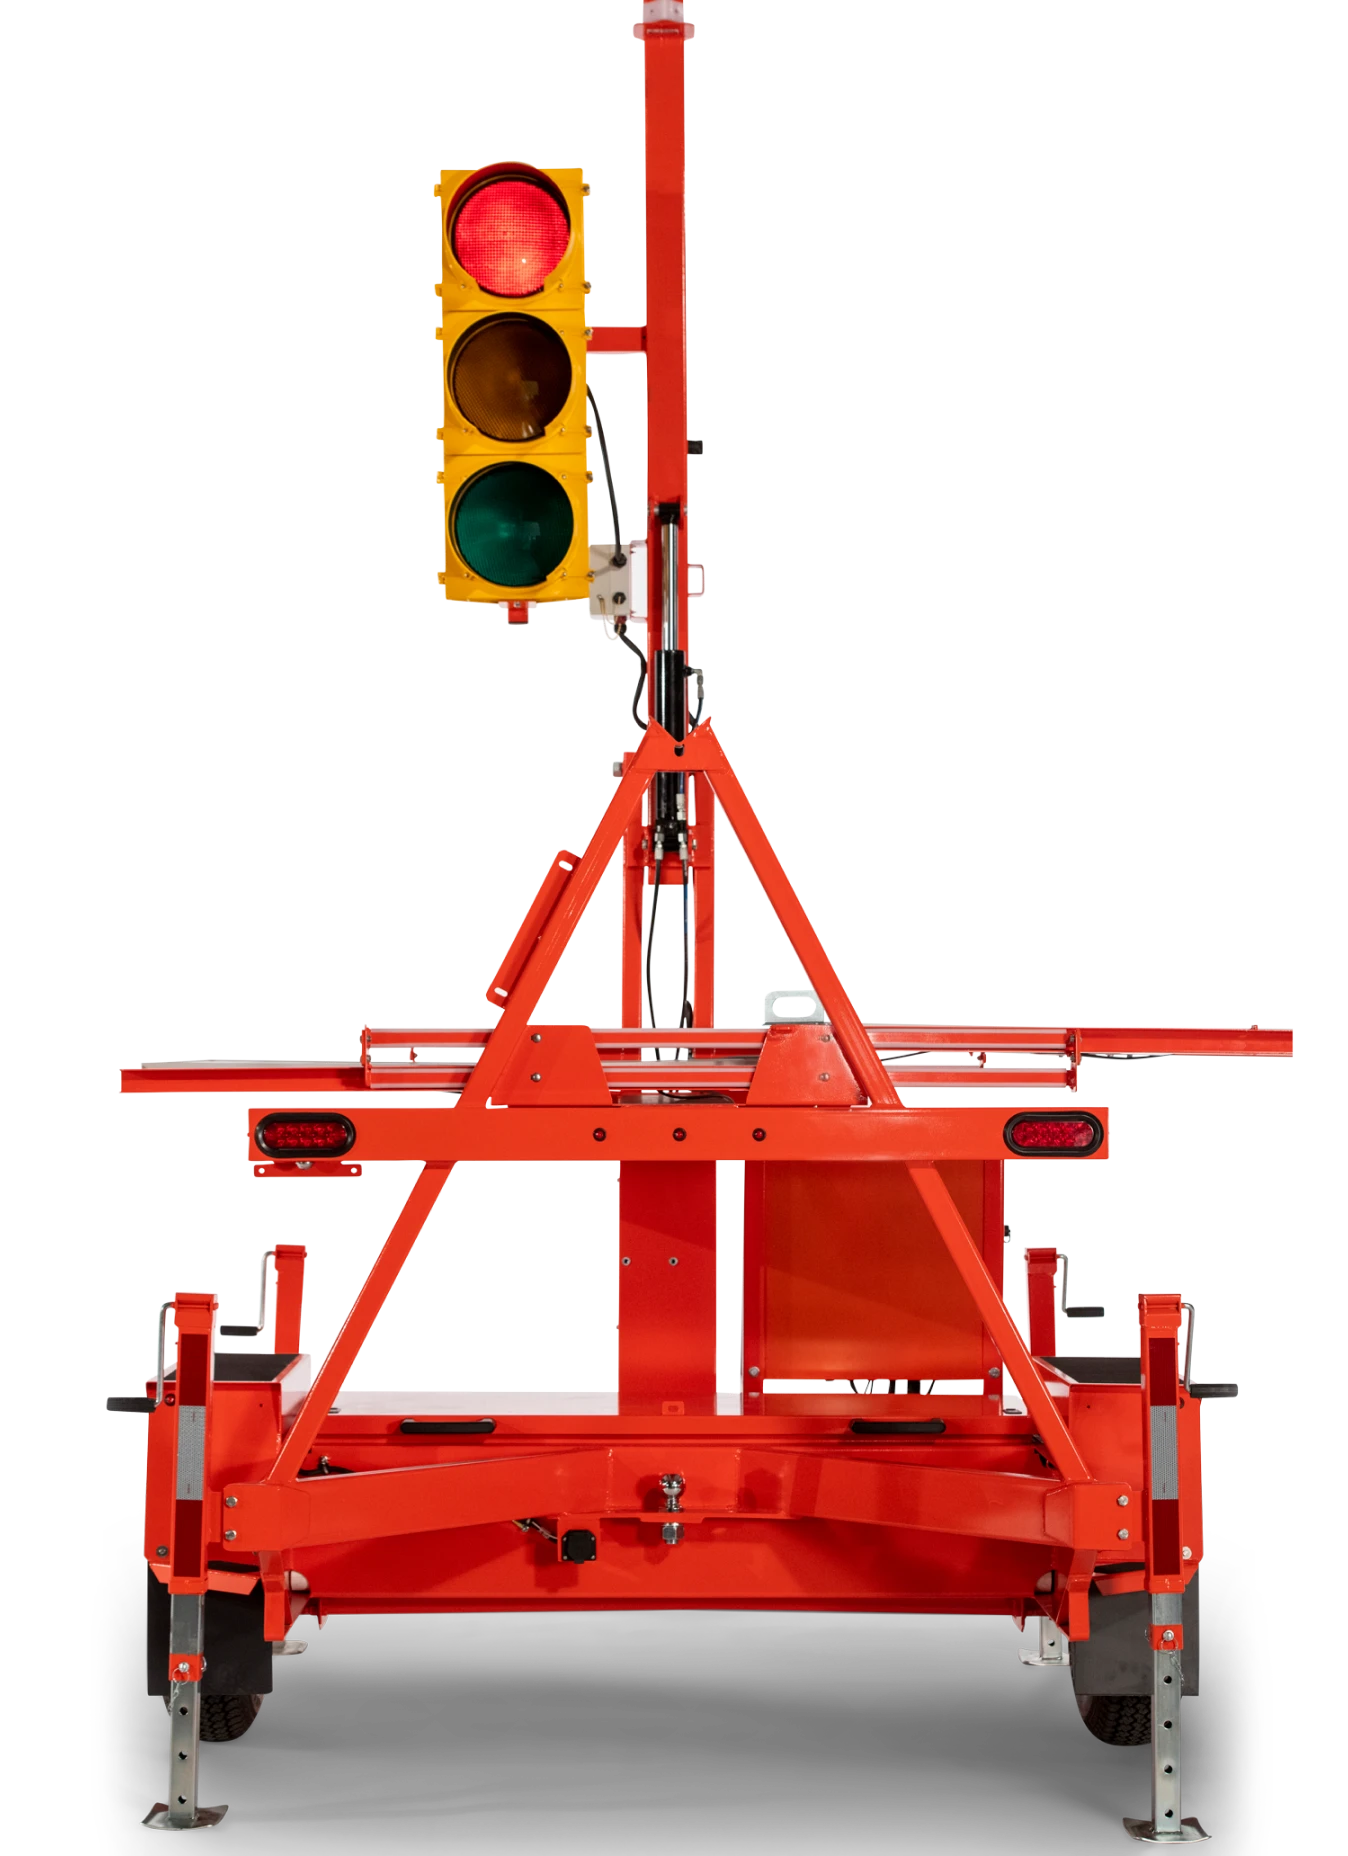 horizont group gmbh TRI-Blitz 1 Warning Lights & Sirens Specifications